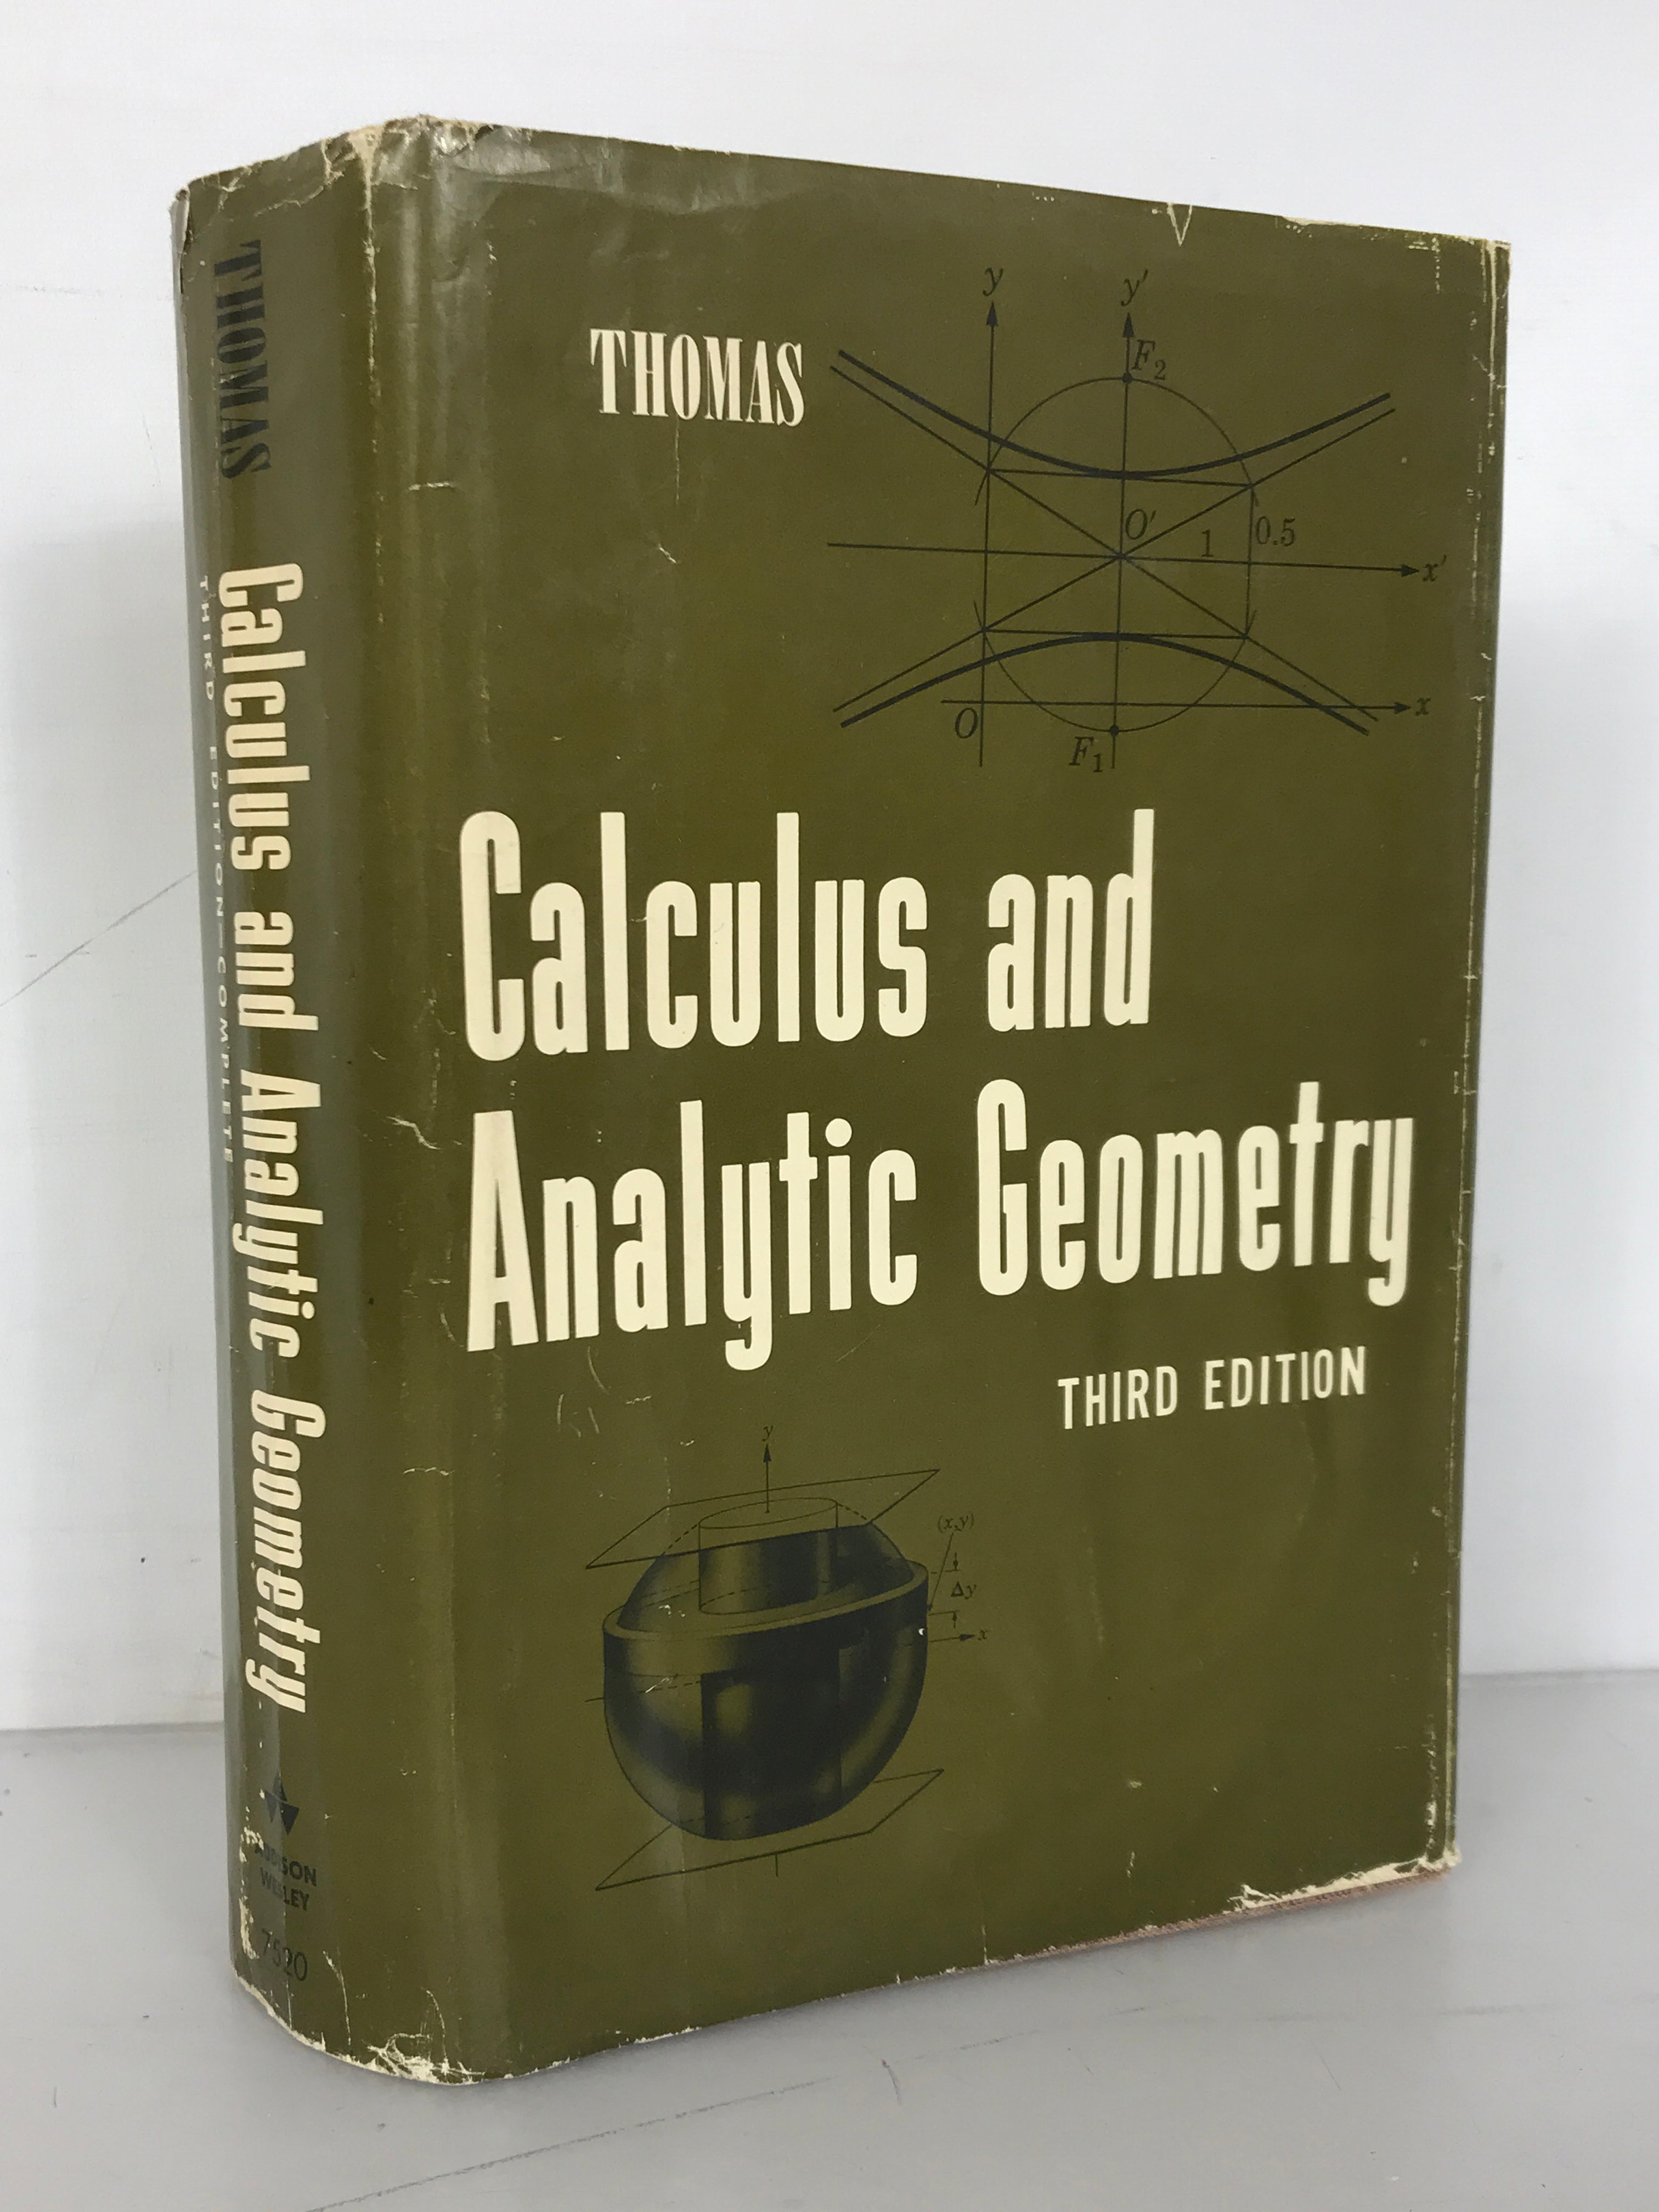 Calculus and Analytic Geometry by George B. Thomas, Jr. Third Edition 1966 Vintage Textbook:  HC DJ